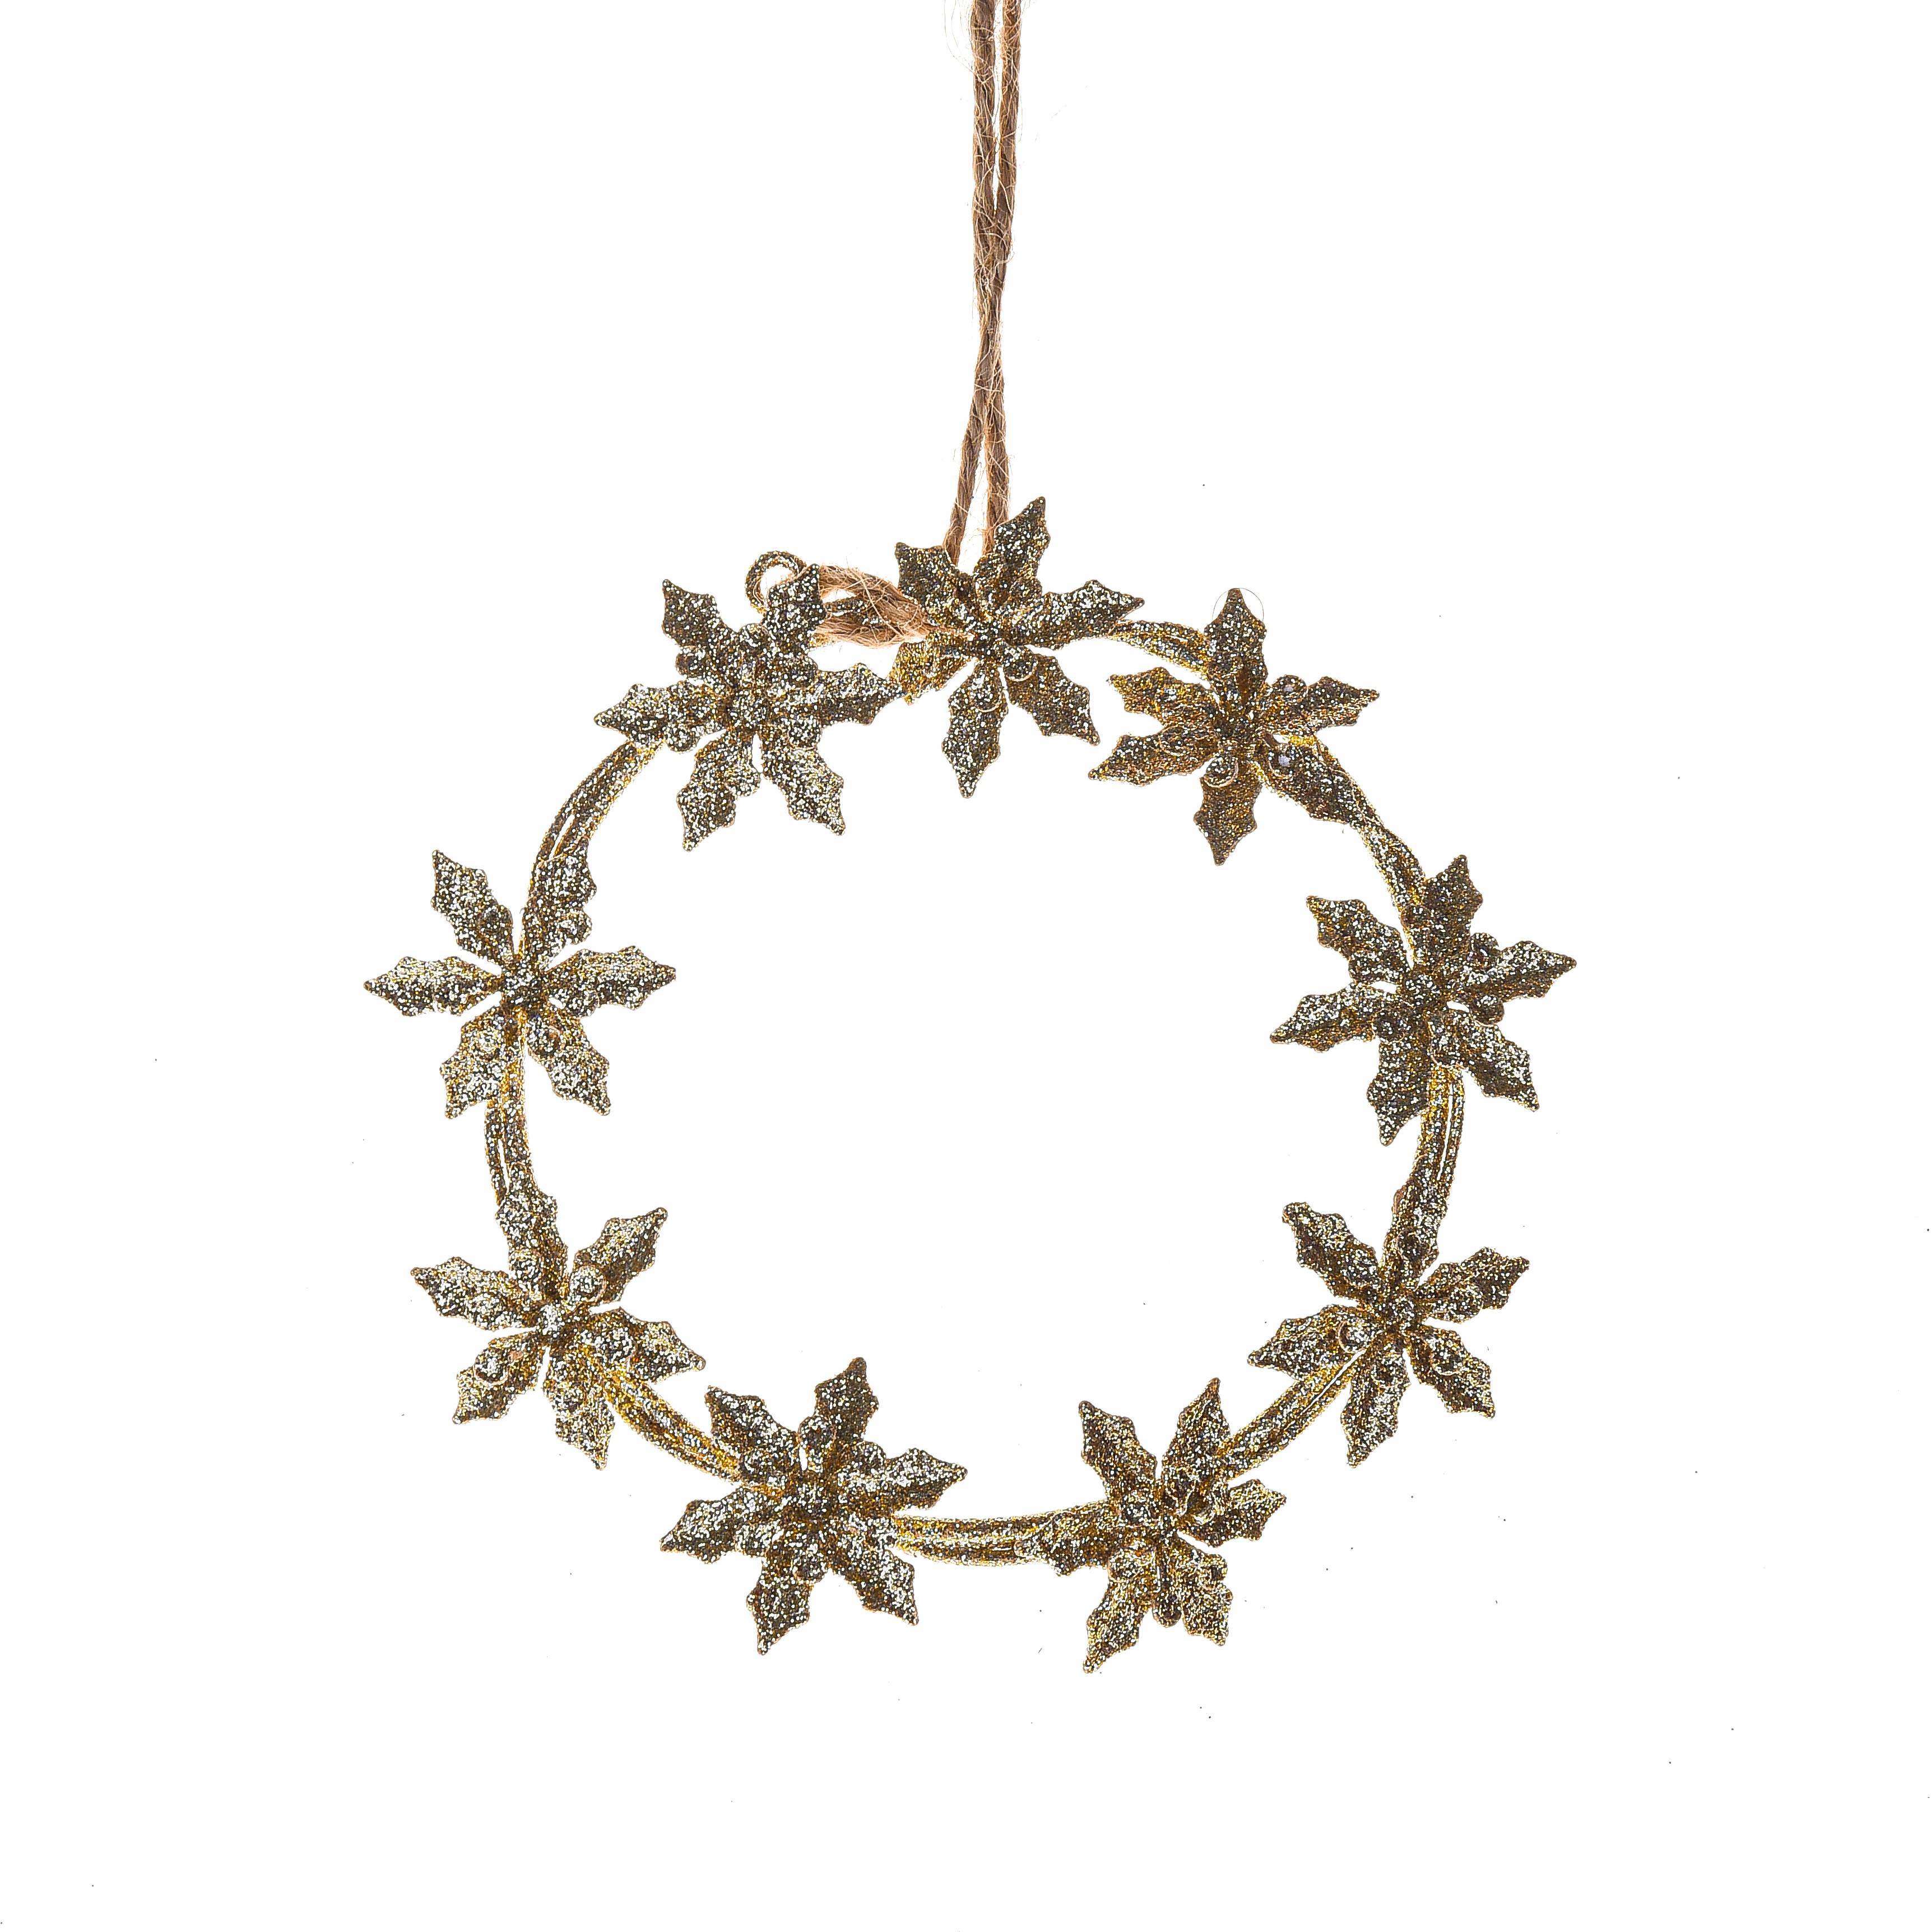 CHRISTMAS ITEMS, HANGING BALLS AND DECORATIONS IN METAL, MINI CORONCINA C/STELLE D.11 CM